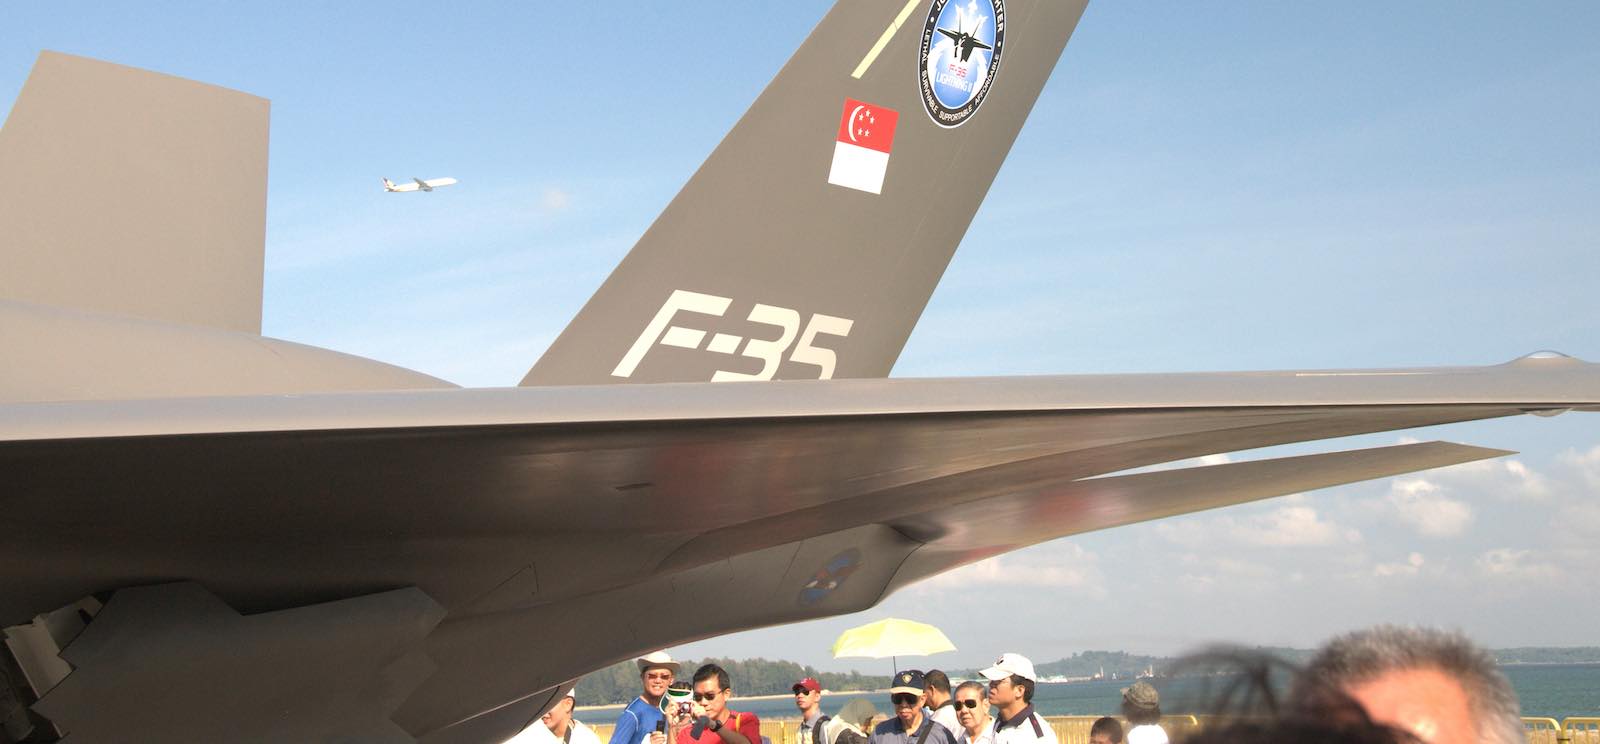 F-35B on display at the Singapore airshow in 2010 (Photo: ngotoh/Flickr)